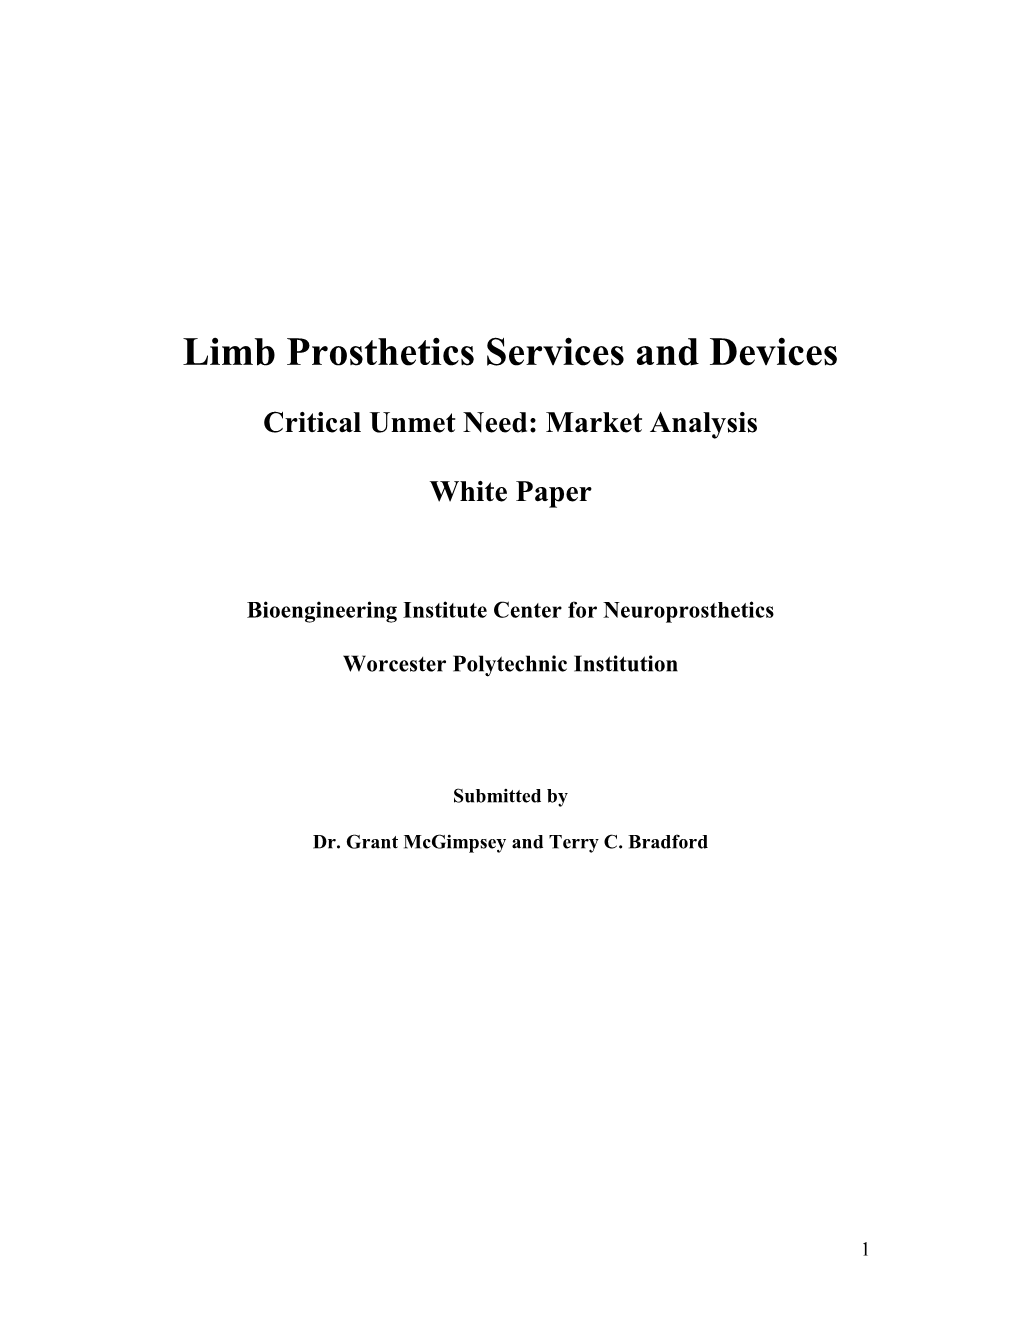 Limb Prosthetics Services and Devices